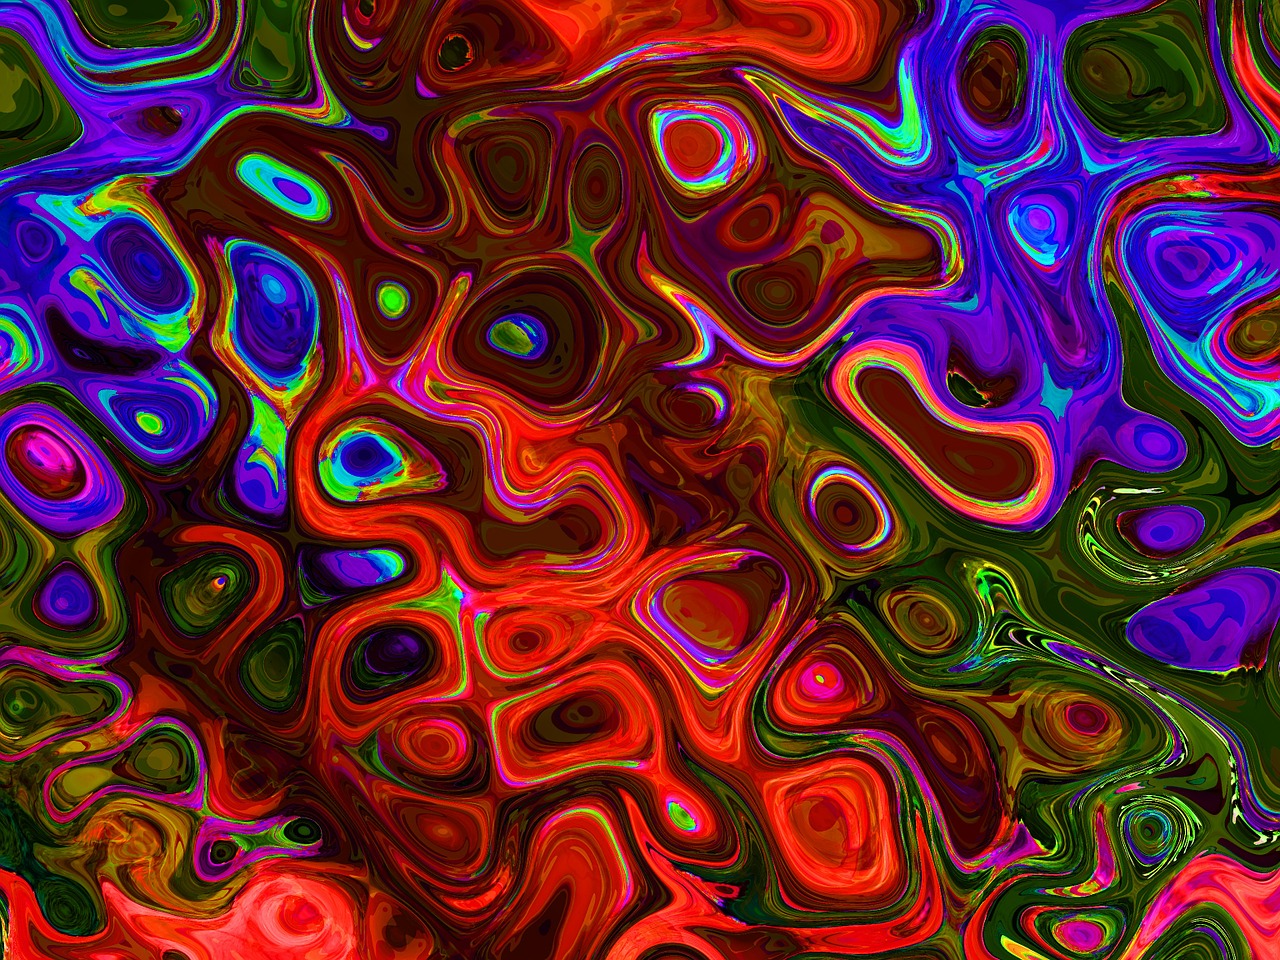 a colorful abstract painting with lots of different colors, digital art, by Daniel Chodowiecki, pexels, generative art, red swirls, psychedelic black light style, iridescent texture, 7 0 mm. digital art